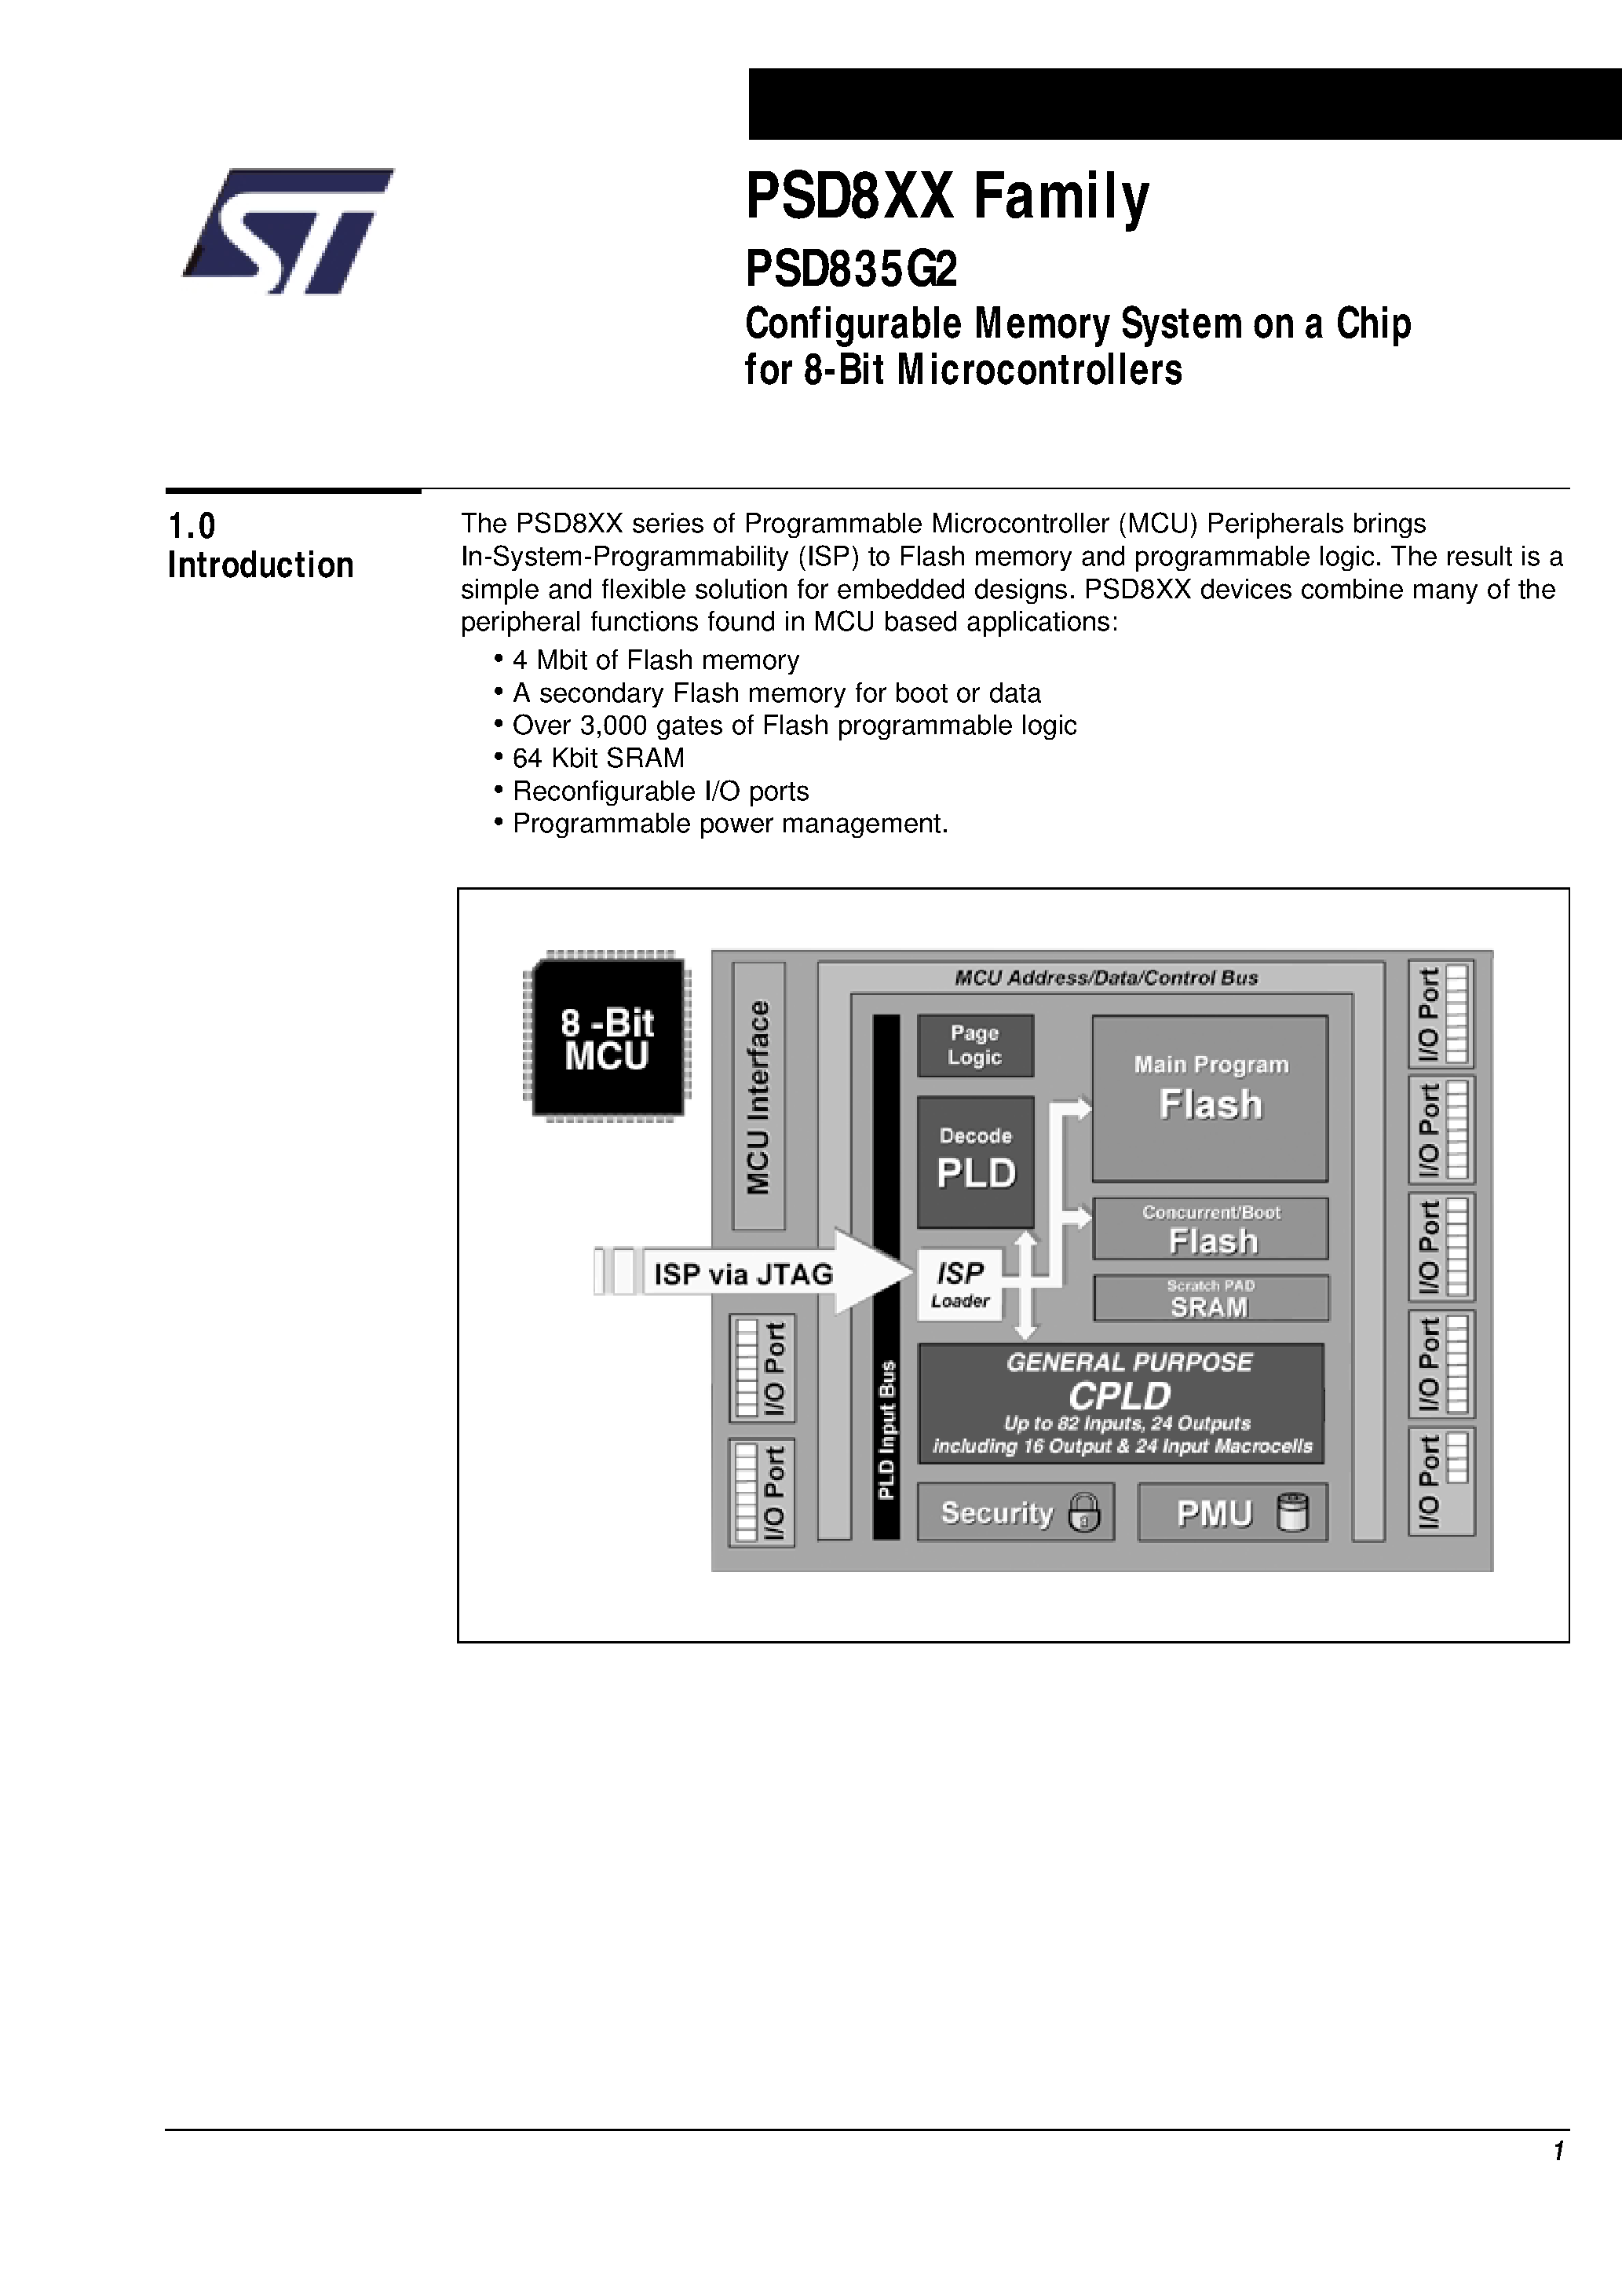 Datasheet PSD835F1V-A-90J - Configurable Memory System on a Chip for 8-Bit Microcontrollers page 2